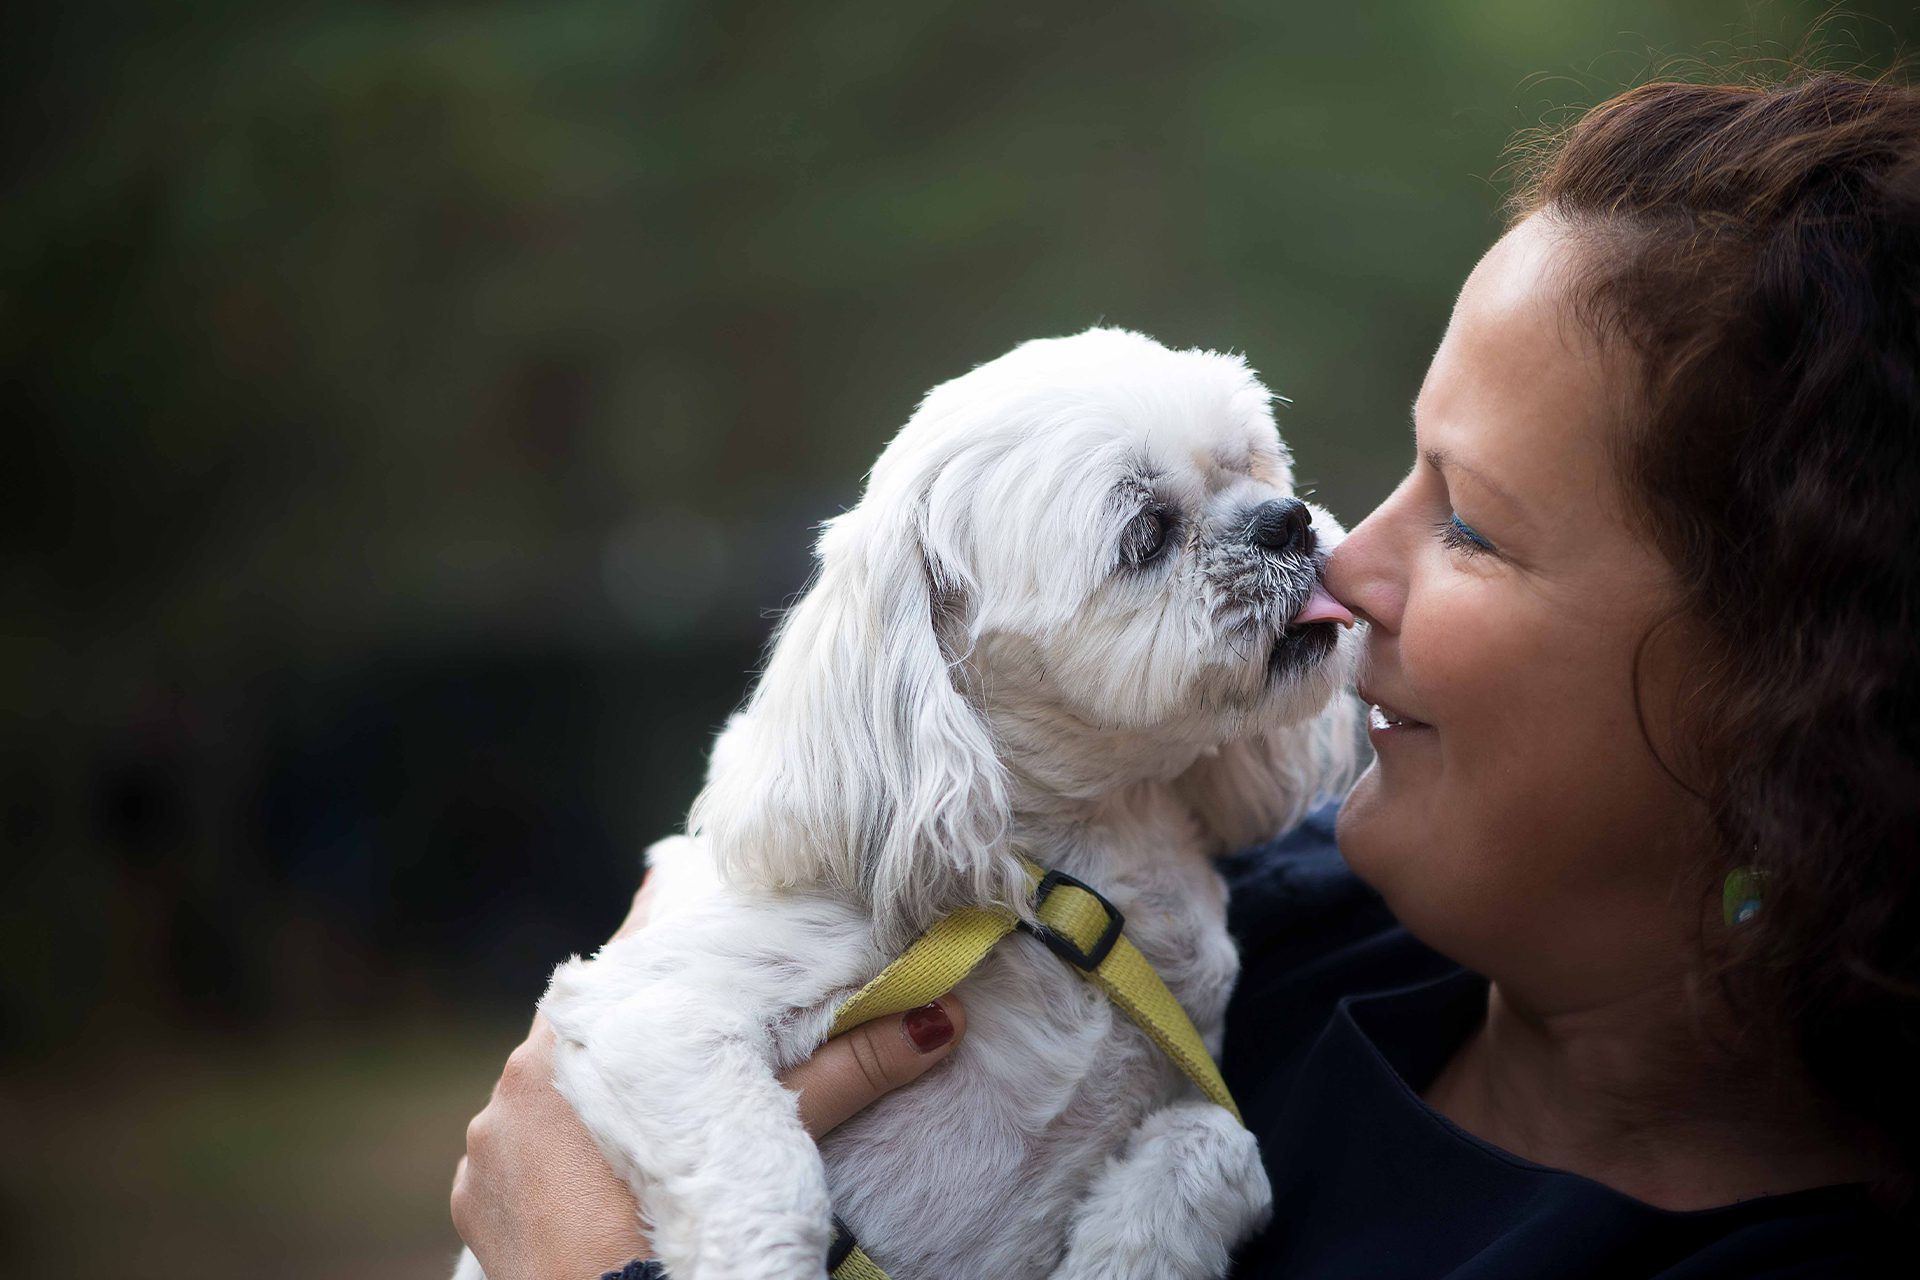 Why do Shih Tzus lick so much? There are two main reasons; Medical and Behavioral.